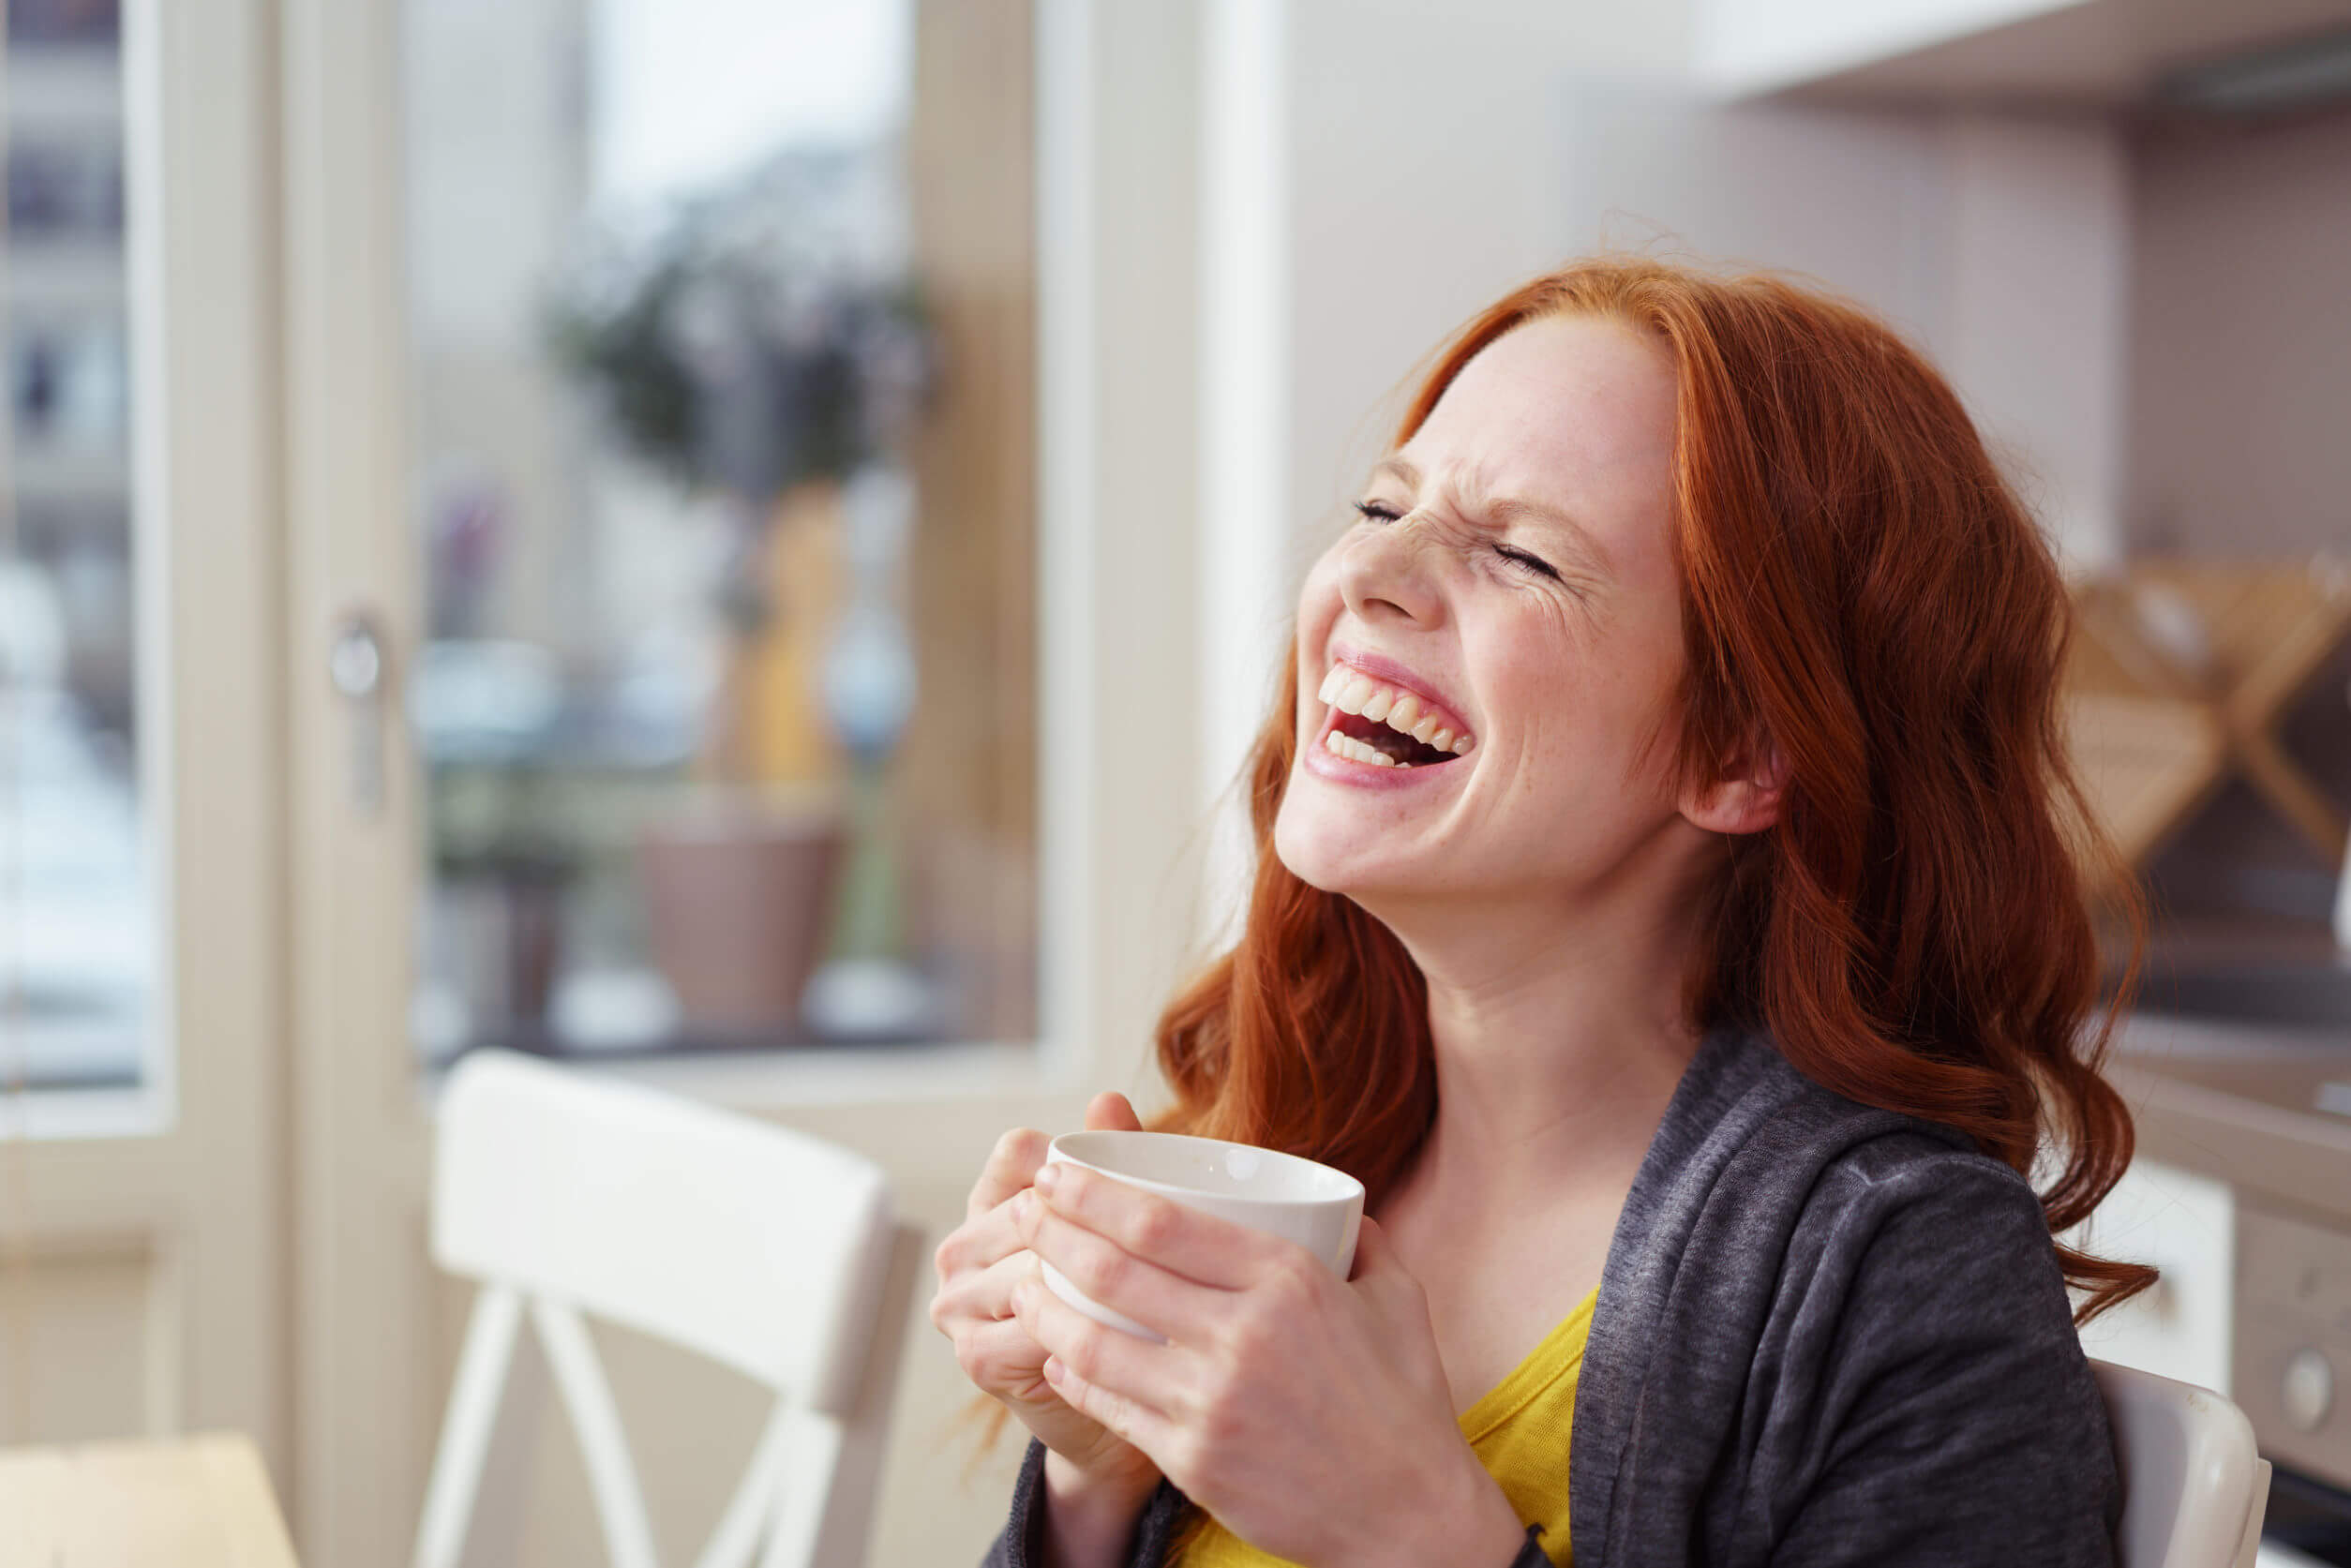 Á red-headed woman sitting at a table, holding a cup of tea, and laughing heartily.